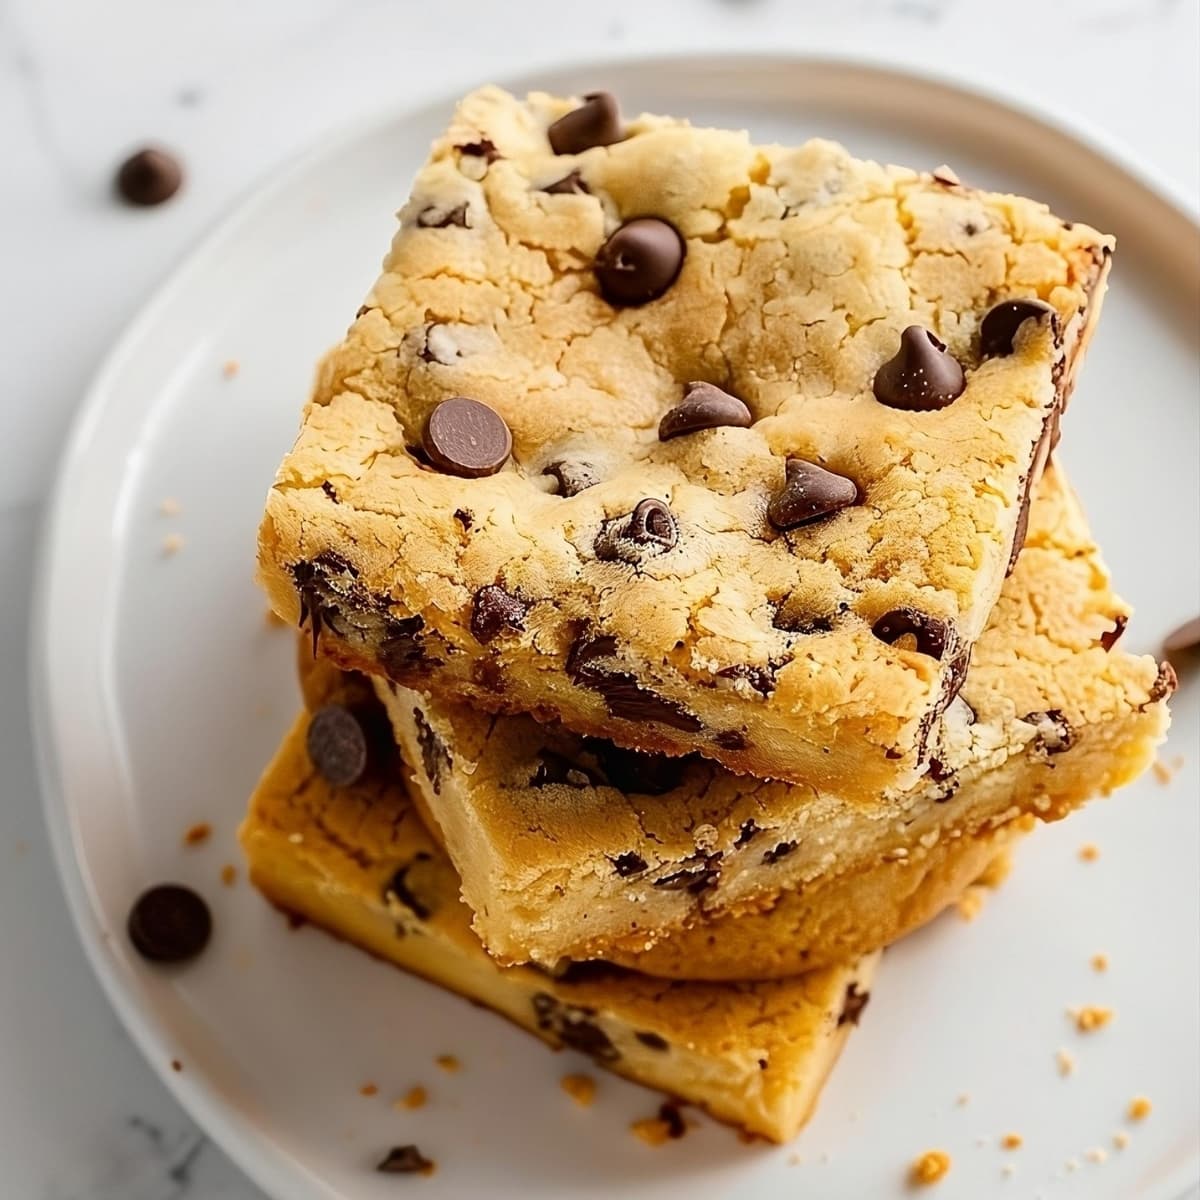 Square slices of cake mix cookie bars with chocolate chips.